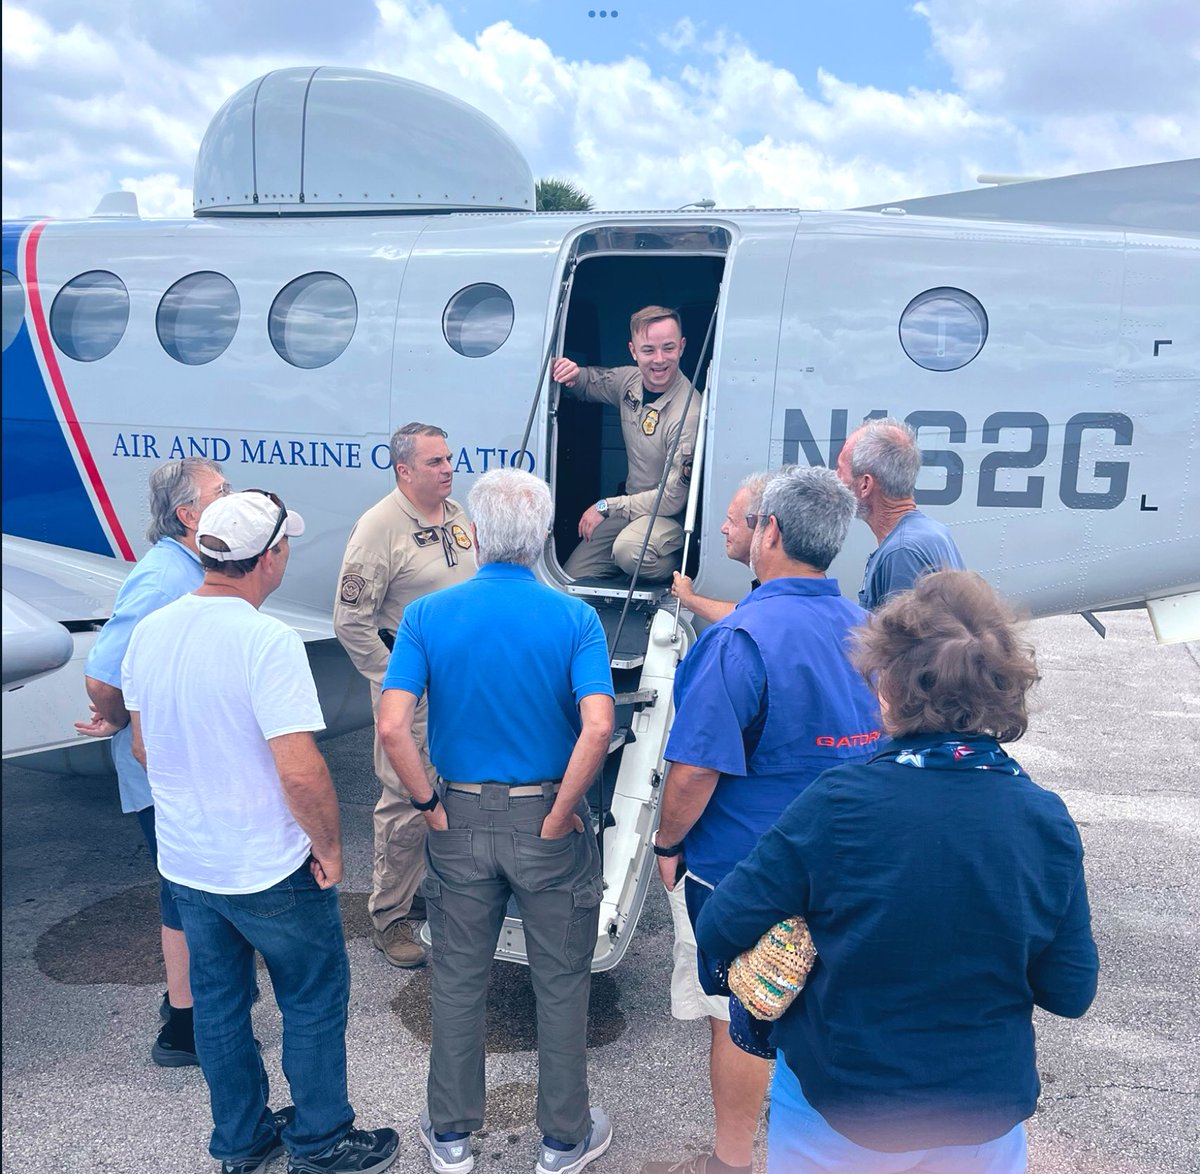 Public outreach..!! @CBPAMORegDirSE agents, who recently stopped for fuel, was met by a group of aviation enthusiasts from the Mooney Airplane Club. Staff was more than willing to give an impromptu discussion on the aircraft and mission of @CBPAMO. @CBPSoutheast @HSTF_Southeast